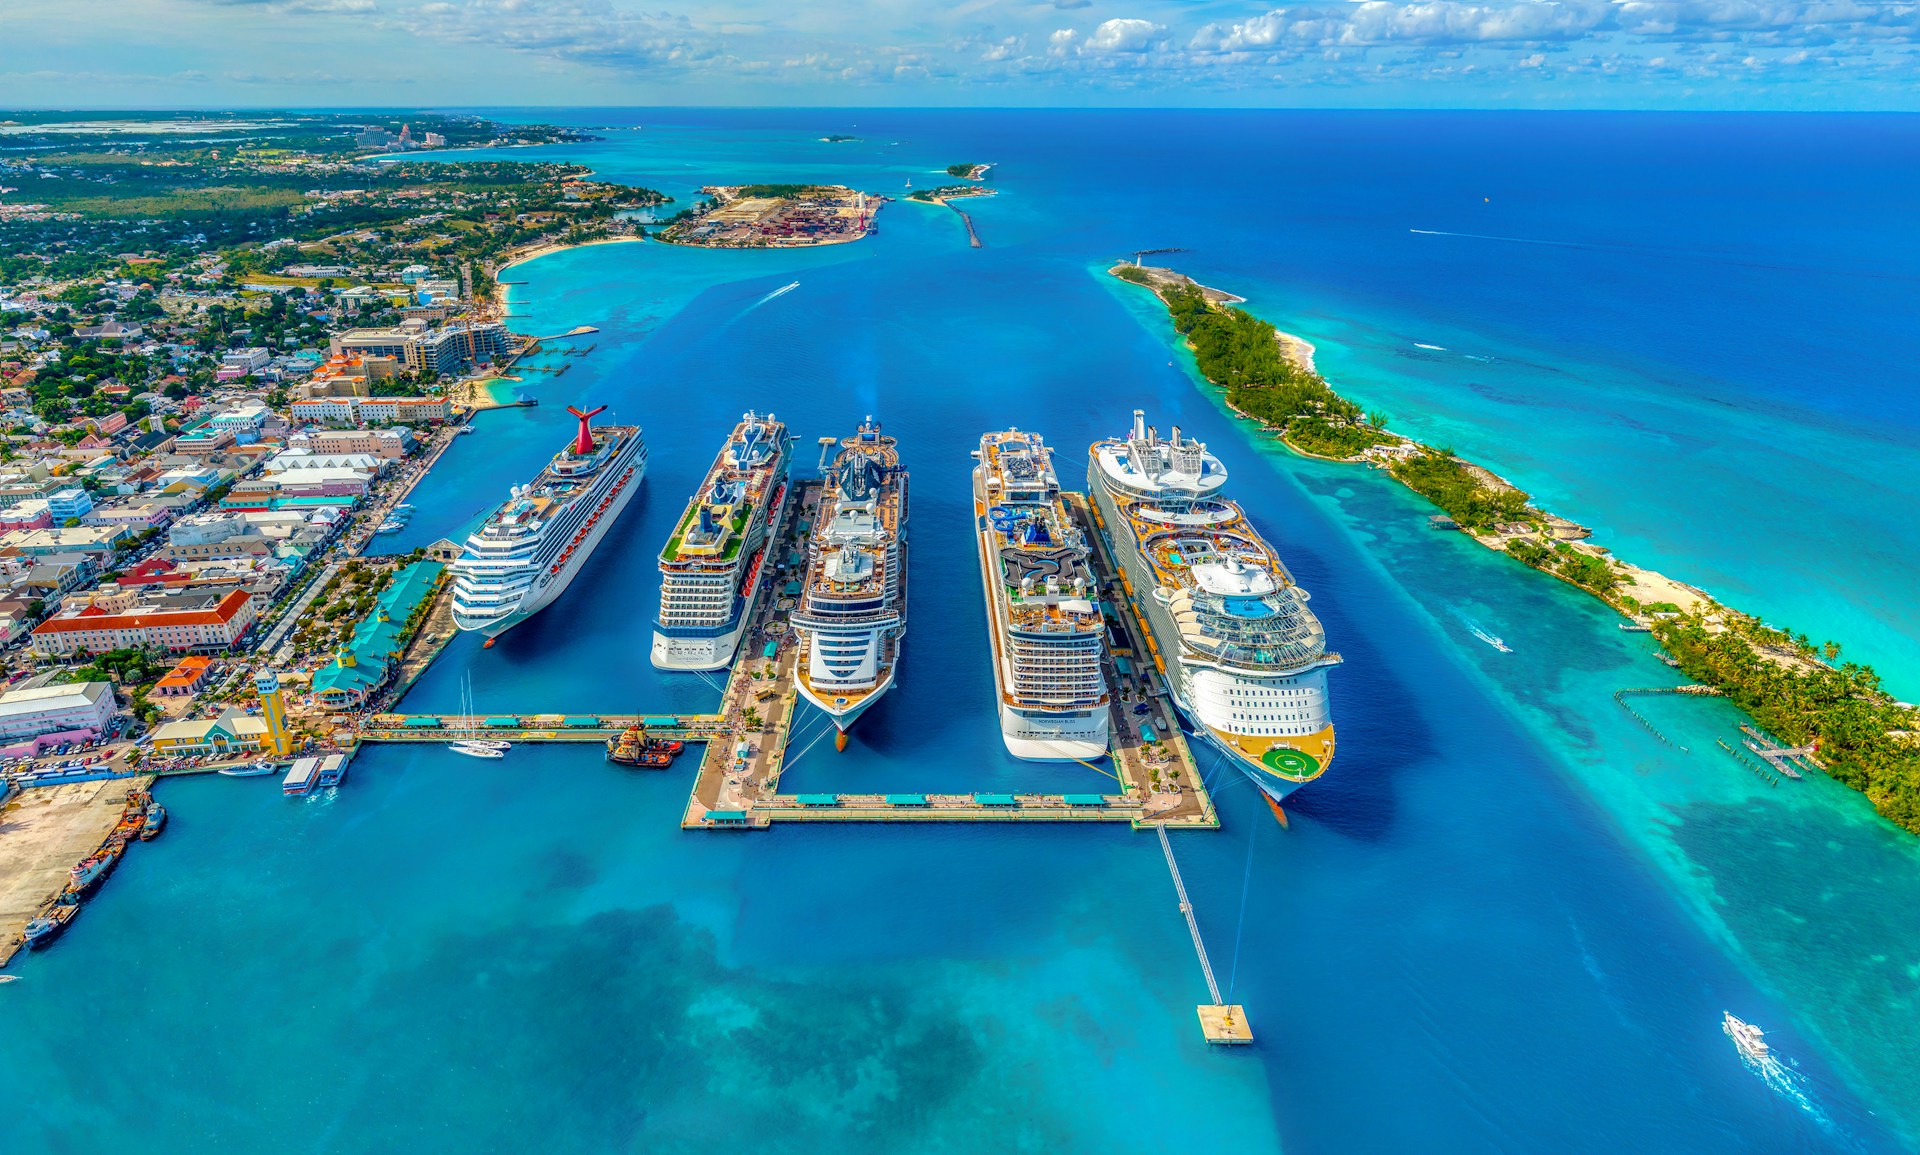 Cruise ships docked in berths